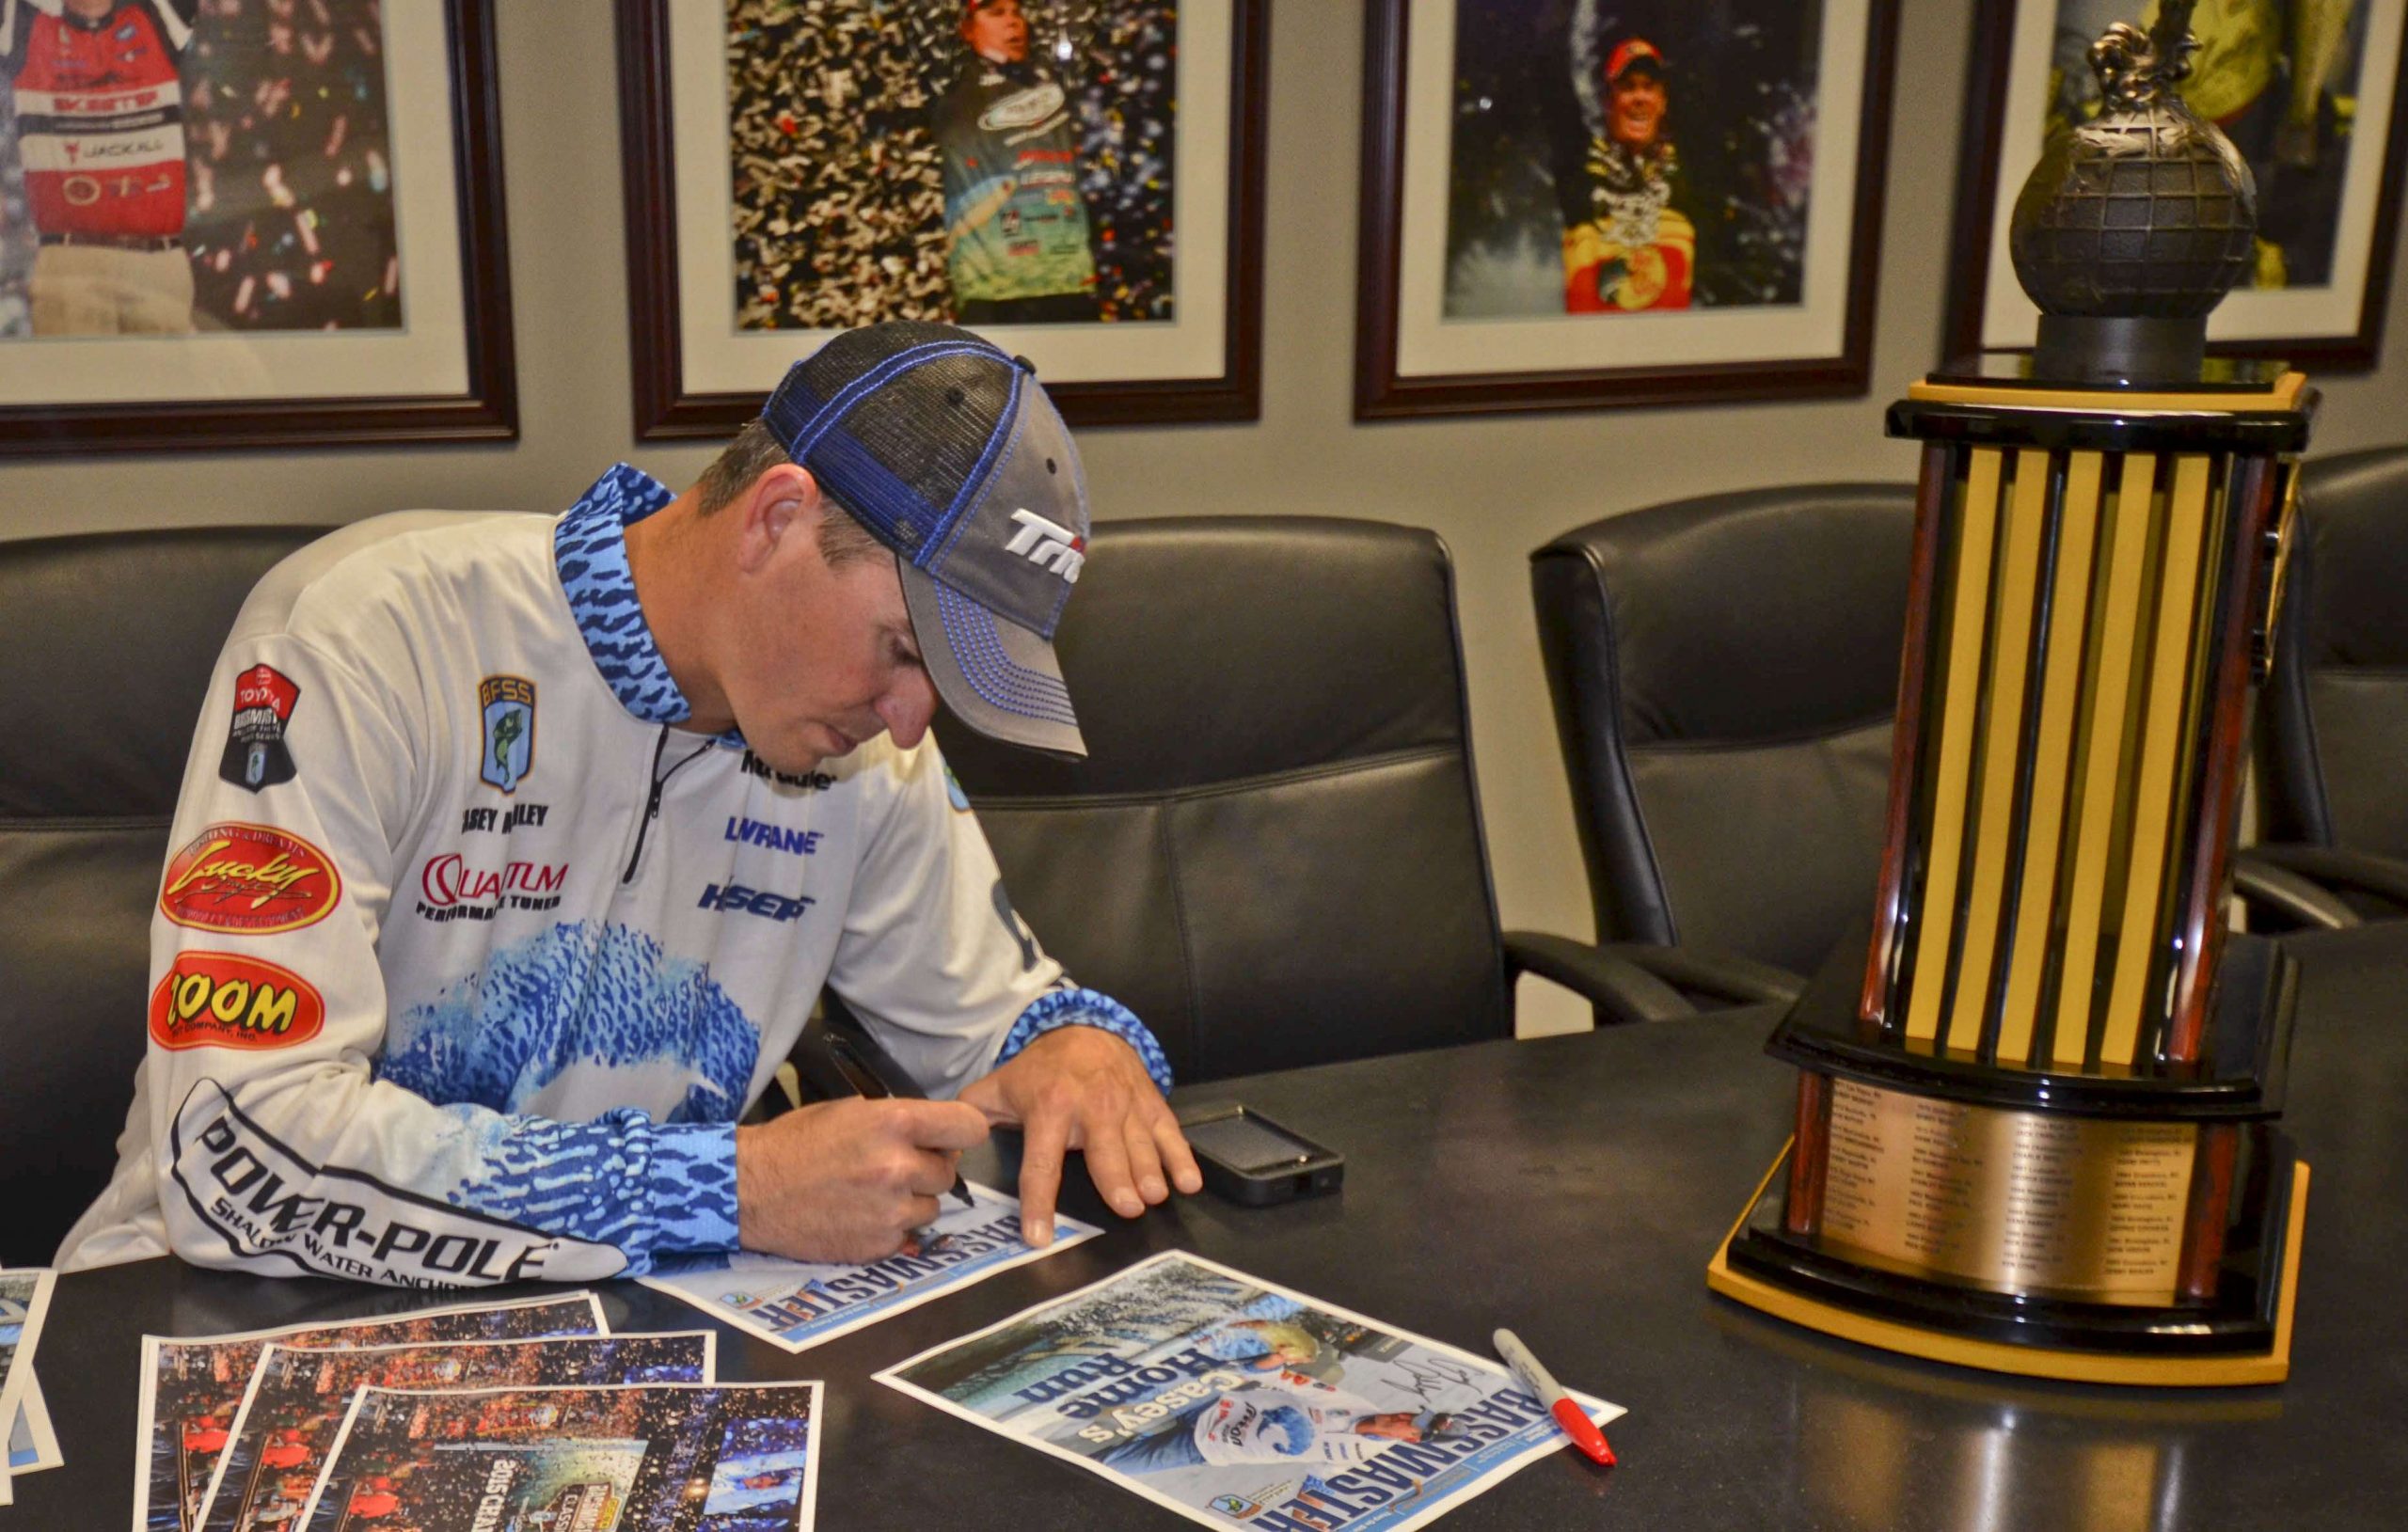 ... signing some of them on printouts of the yet-to-be-printed cover of Bassmaster Magazine, which he will be featured on.